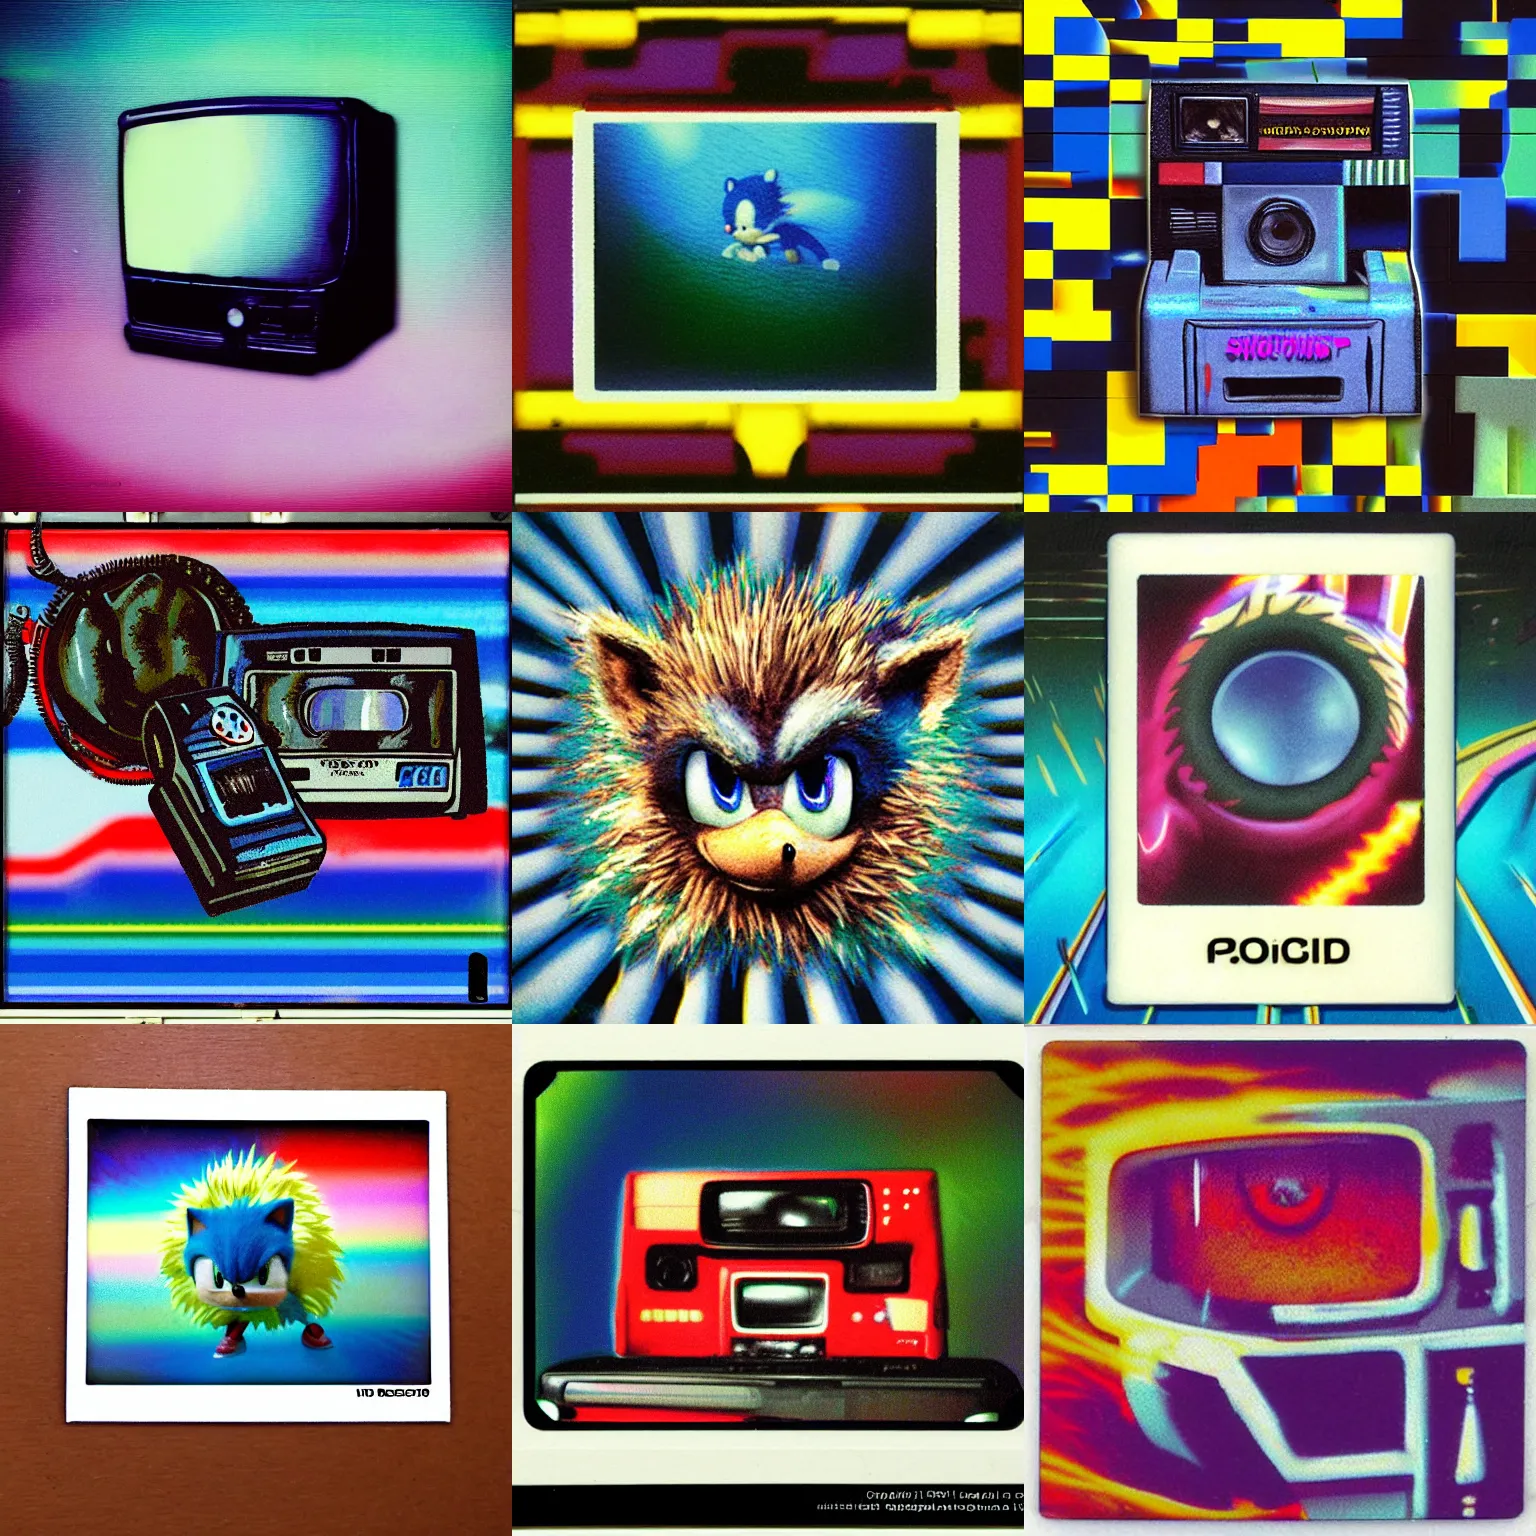 Prompt: close up polaroid vhs ntsc portrait of sonic hedgehog, matte painting landscape of a surreal sharp foggy detailed professional soft pastels high quality airbrush art album cover of a liquid dissolving airbrush art lsd dmt sonic the hedgehog swimming through cyberspace vhs checkerboard background 1 9 9 0 s 1 9 9 2 sega genesis rareware video game album cover